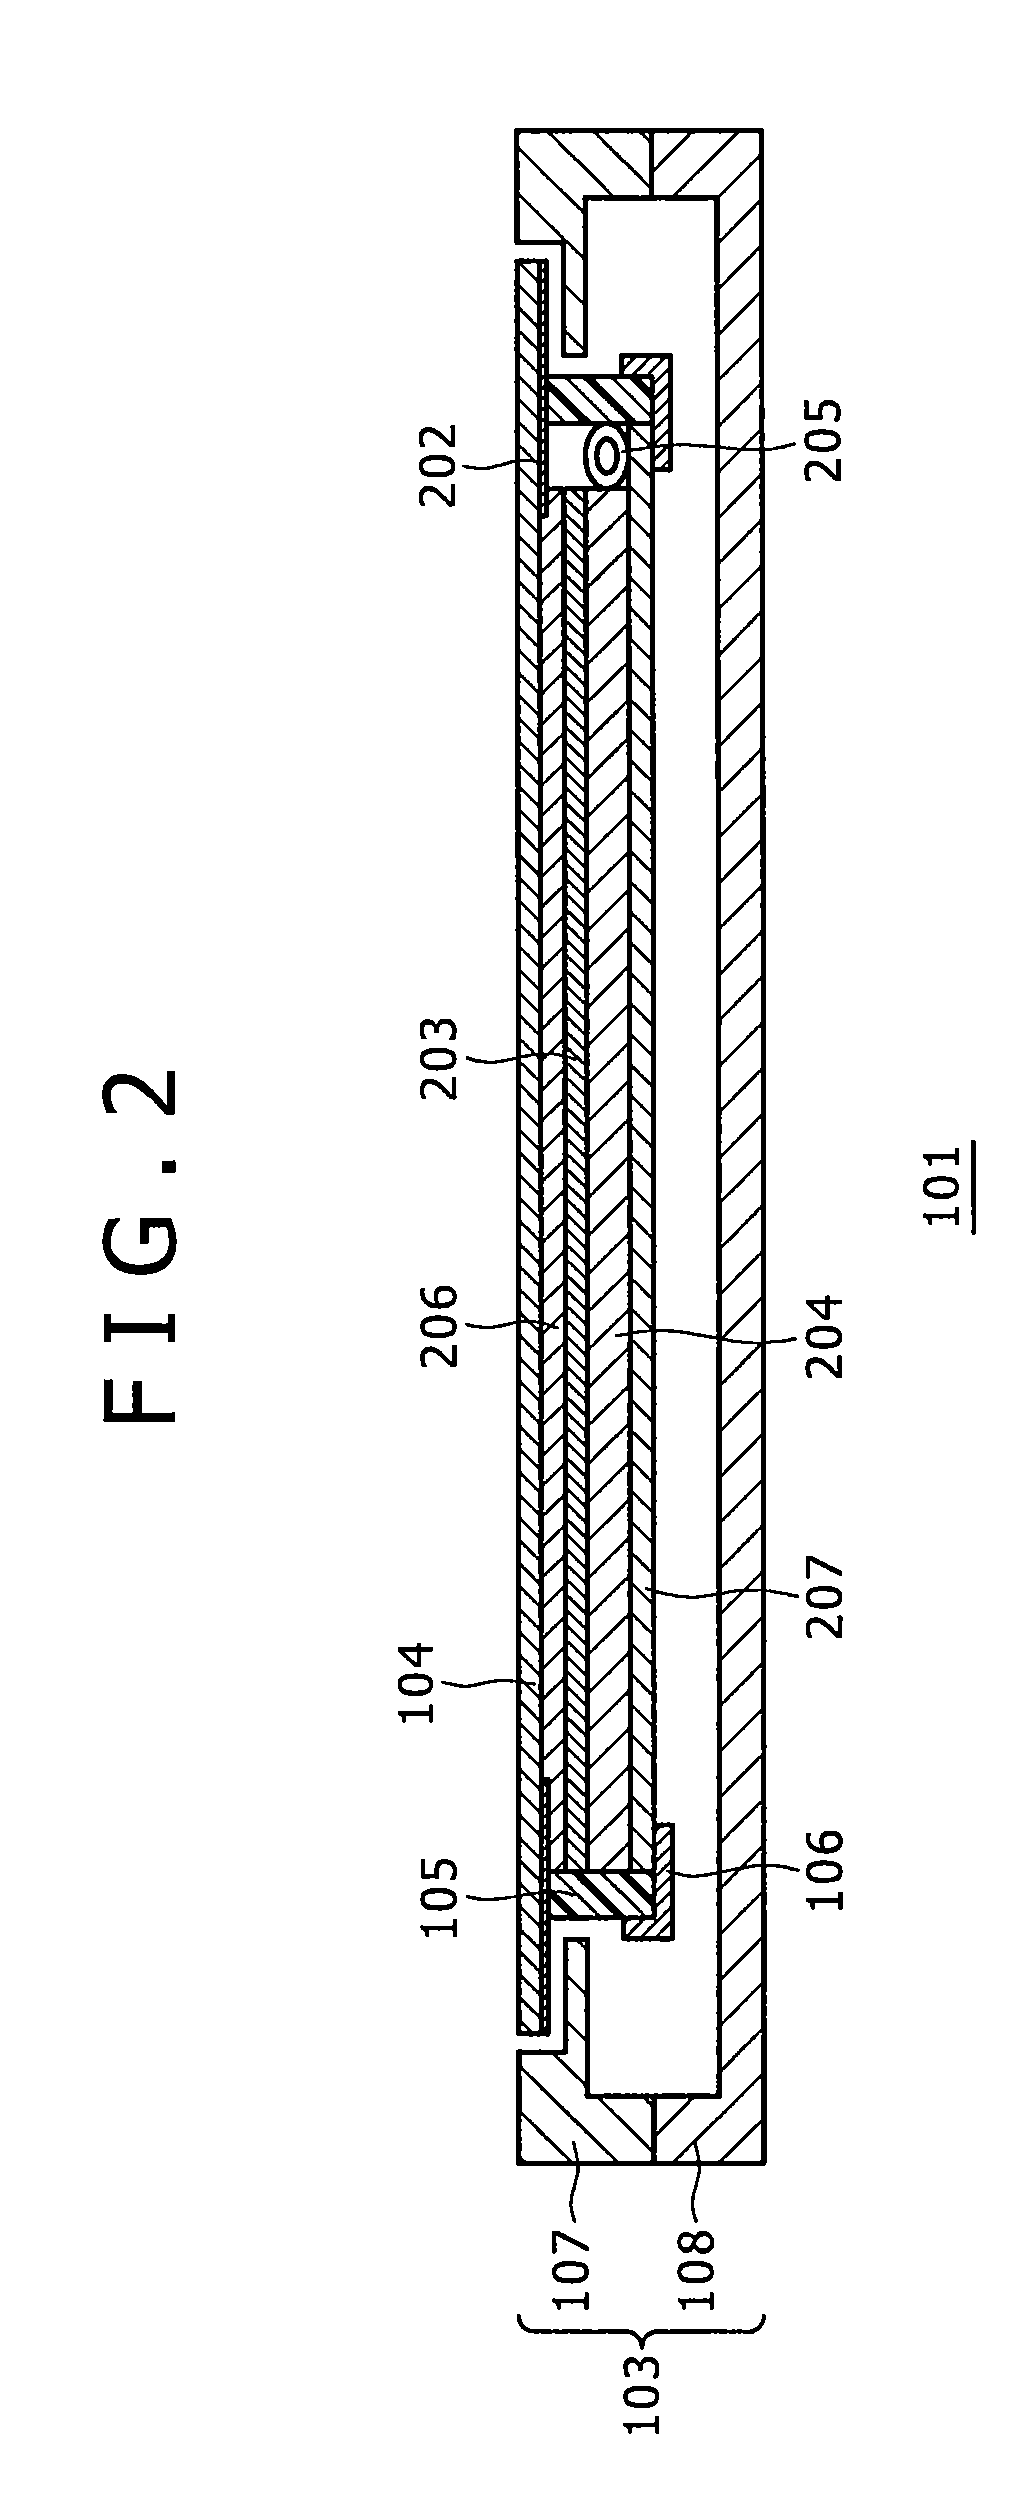 Position detector, position detecting circuit and position detecting method